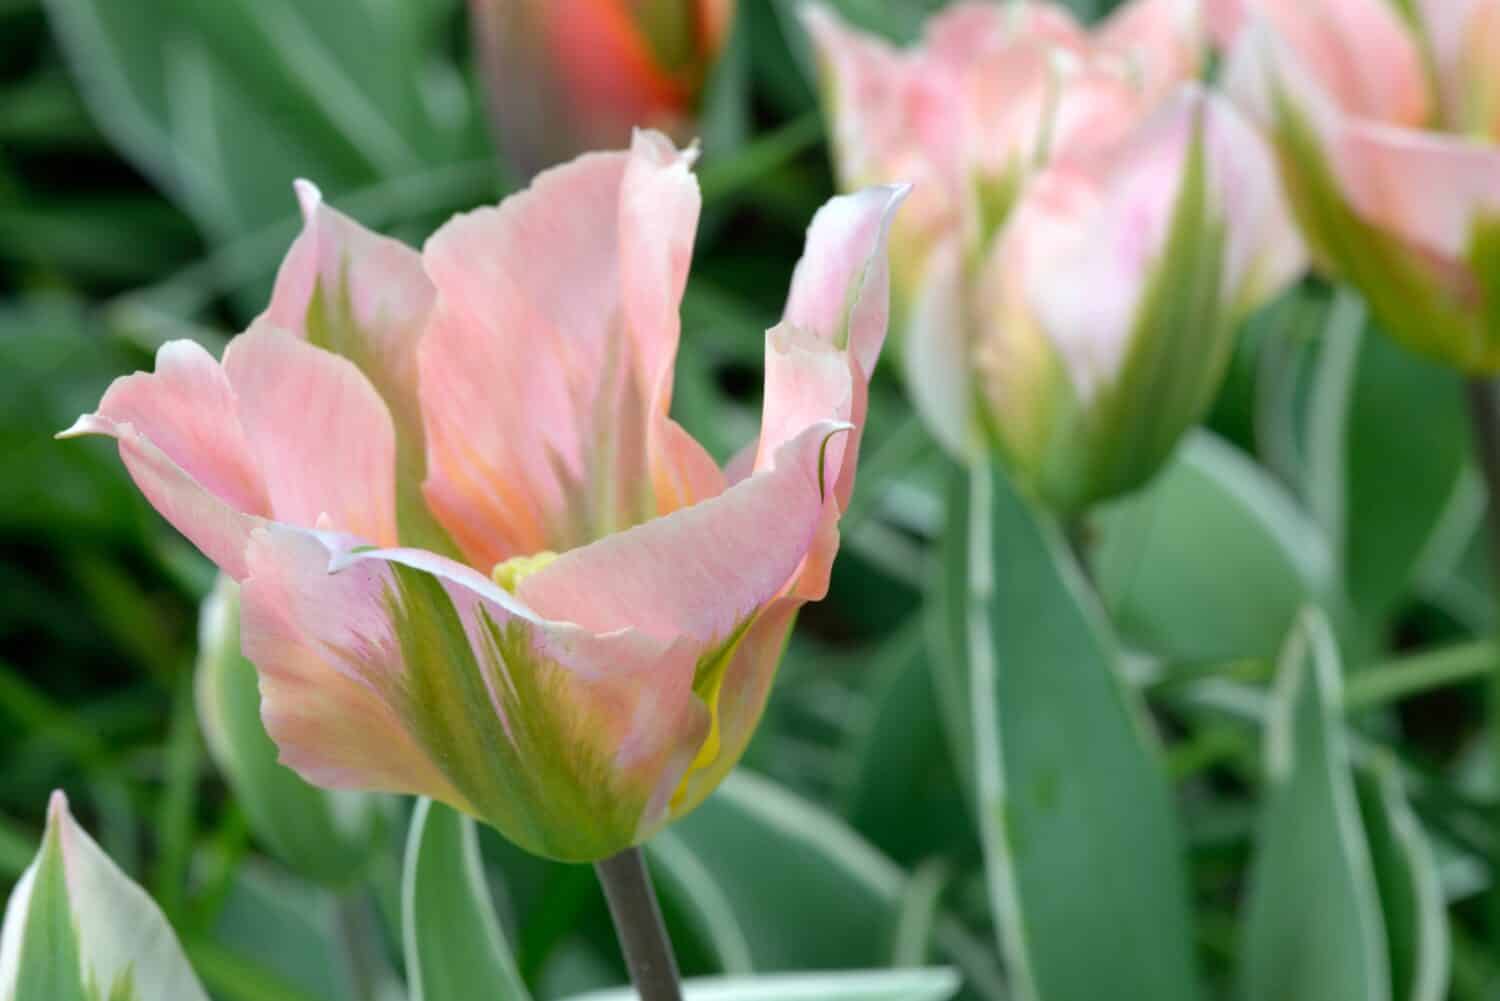 Tulipa 'China Town' is a Viridiflora tulip (Div. 8) with green and pink flowers